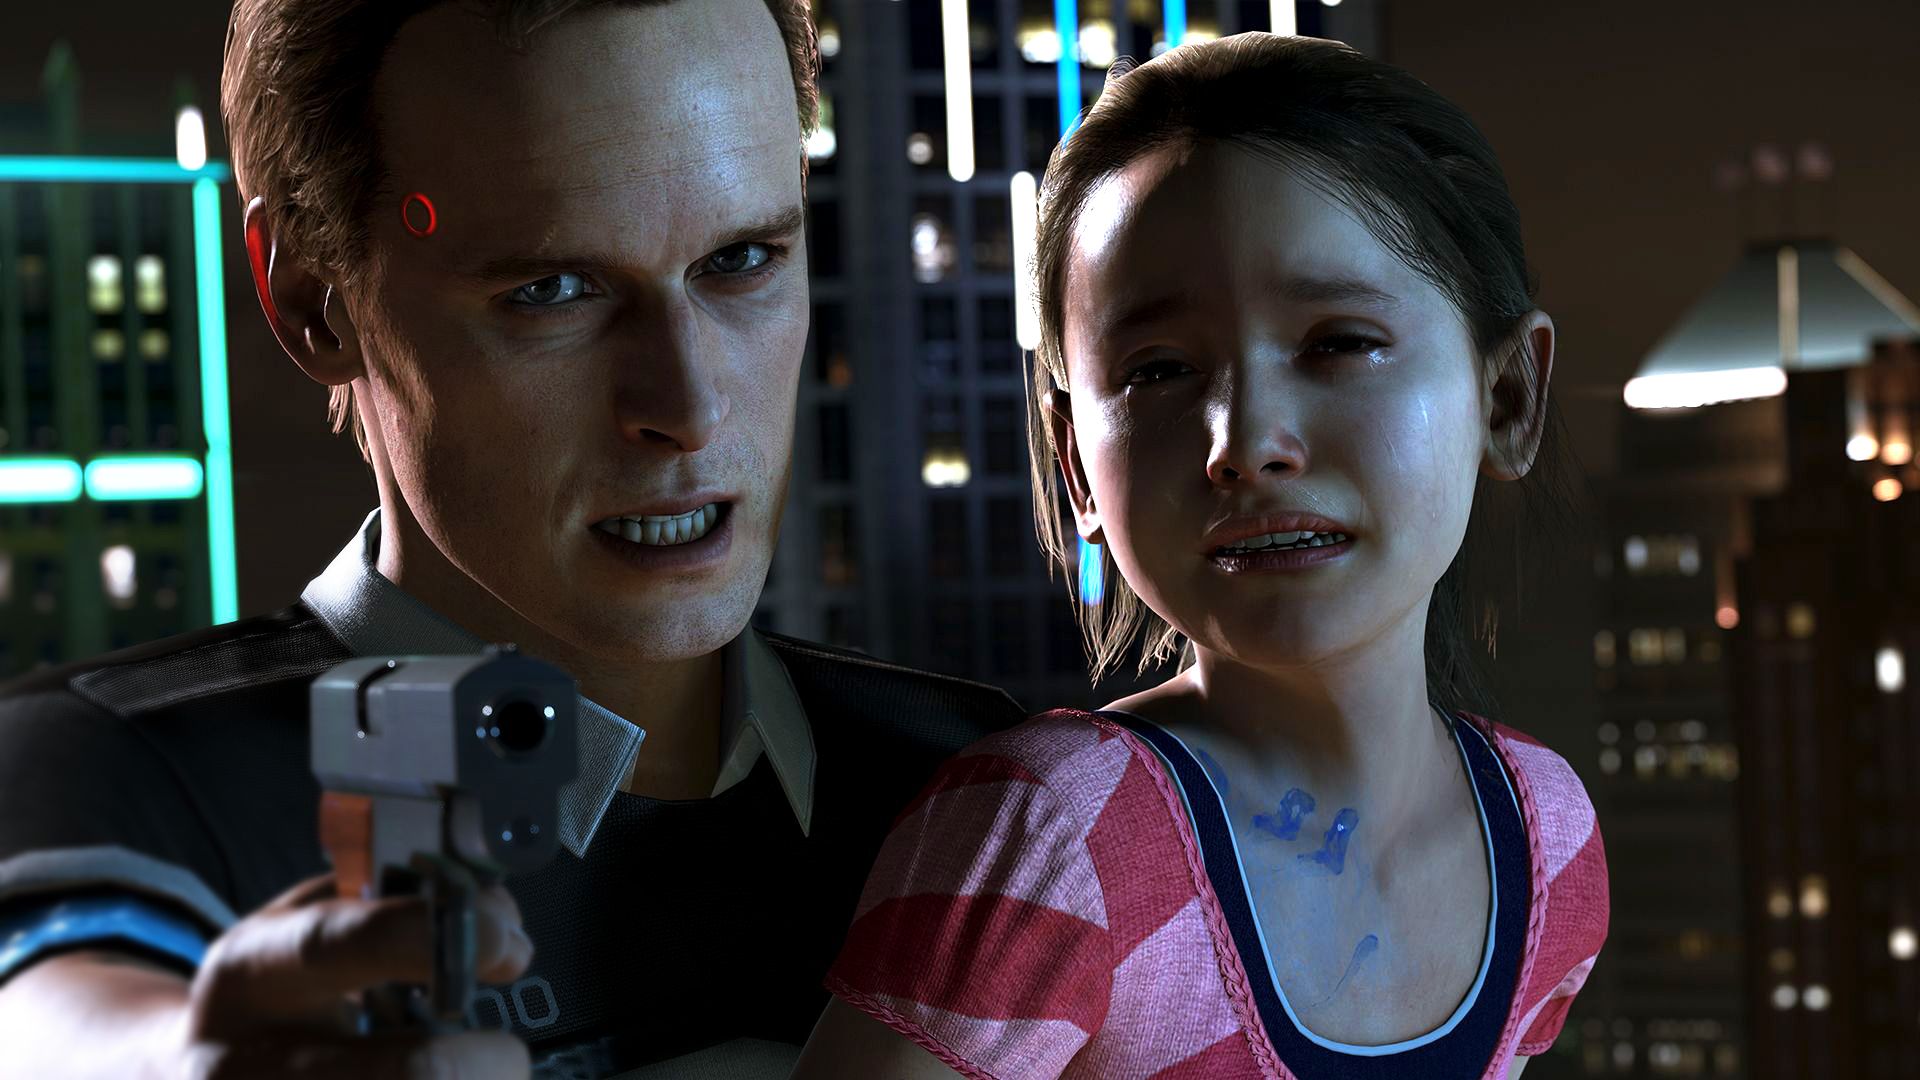 Nice Images Collection: Detroit: Become Human Desktop Wallpapers